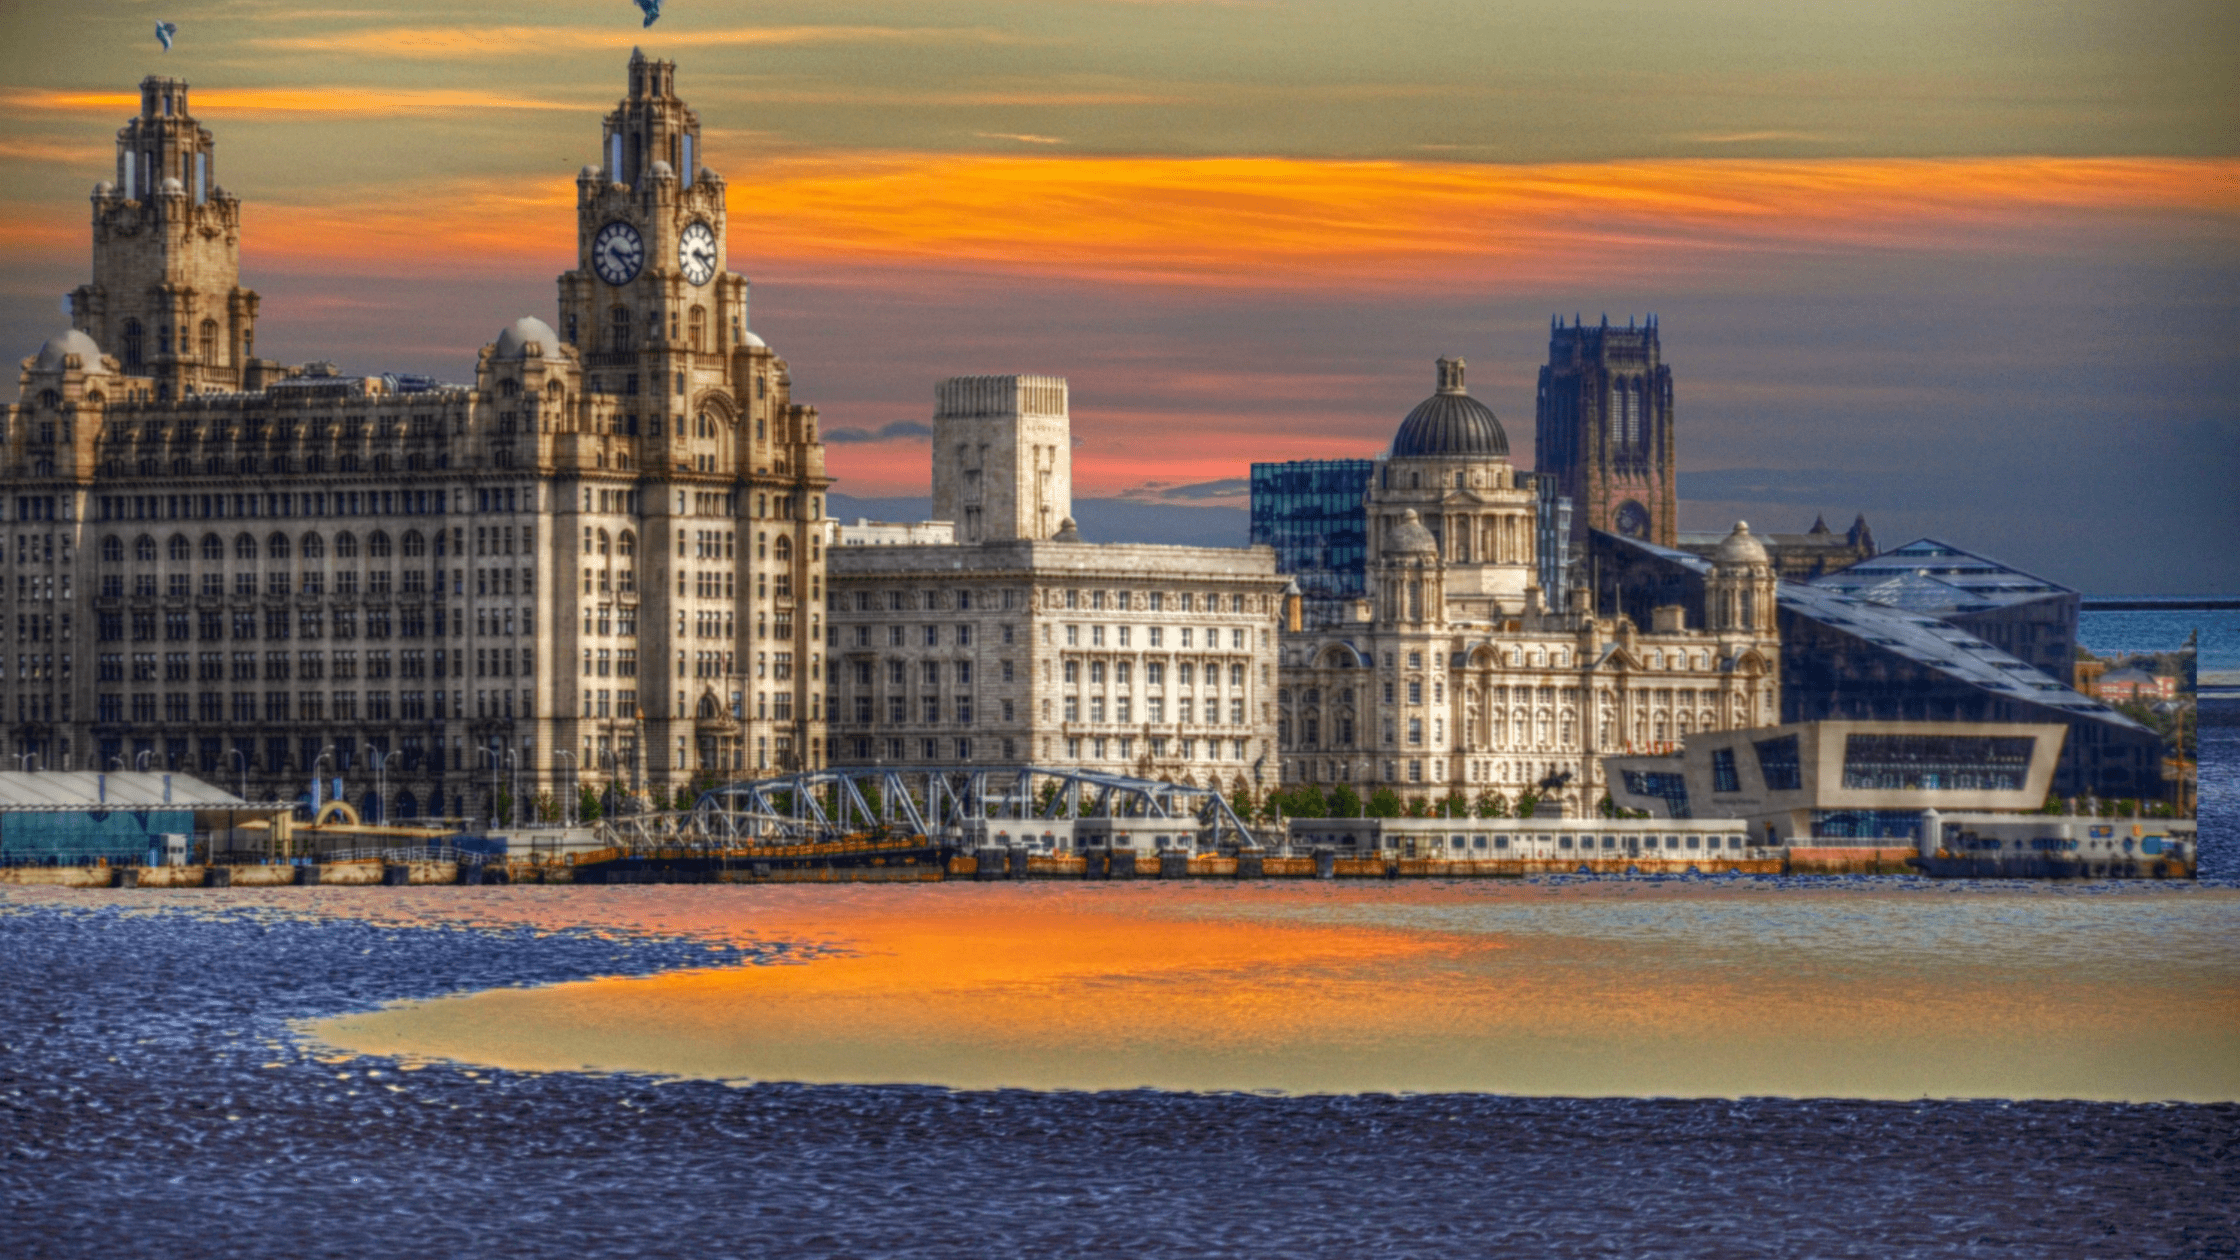 Come together right now in Liverpool